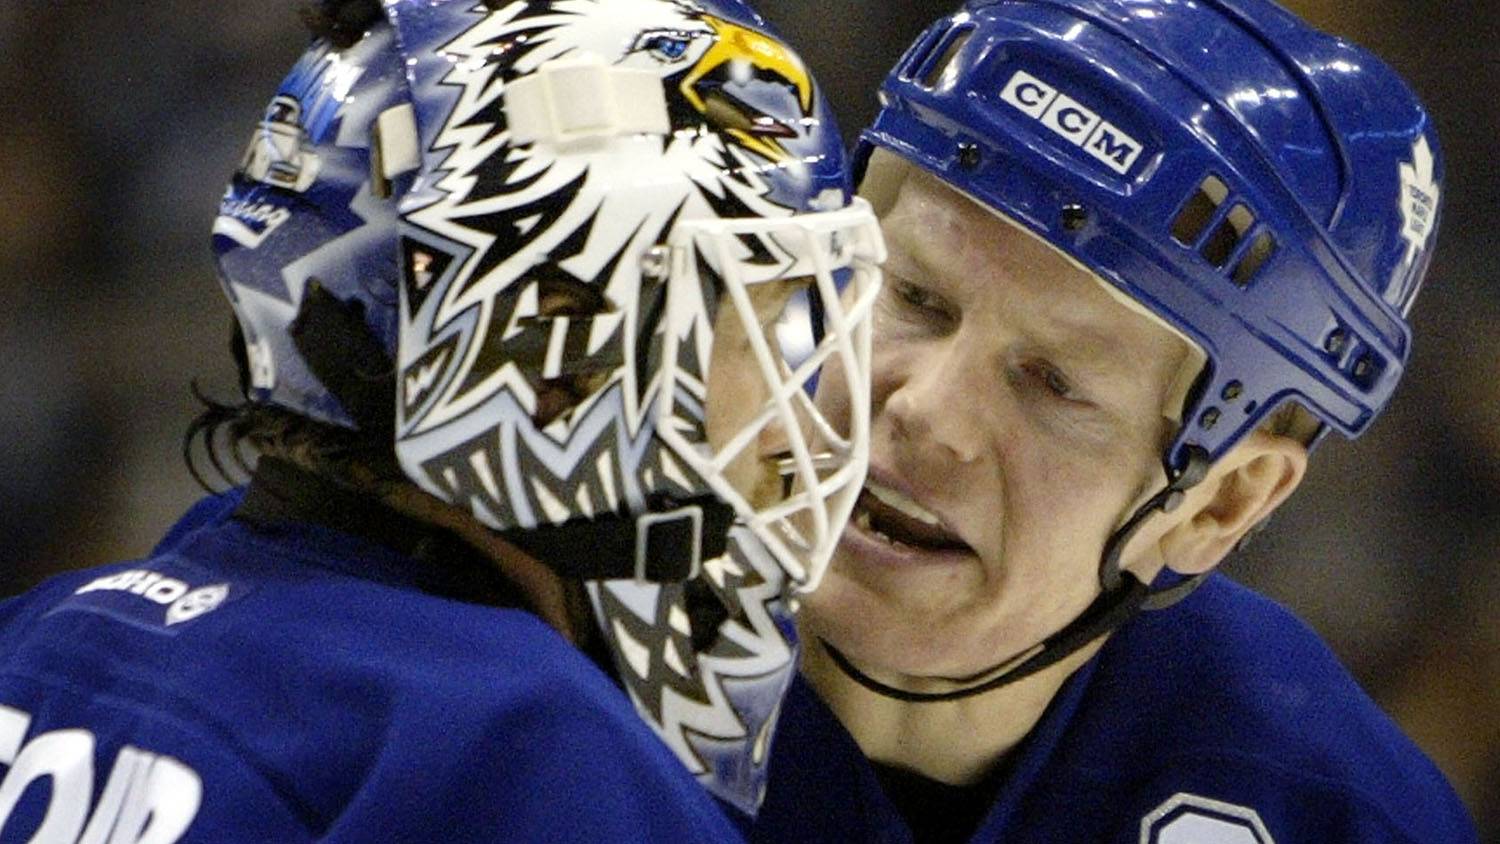 Mats Sundin picks the five best players he ever played with and